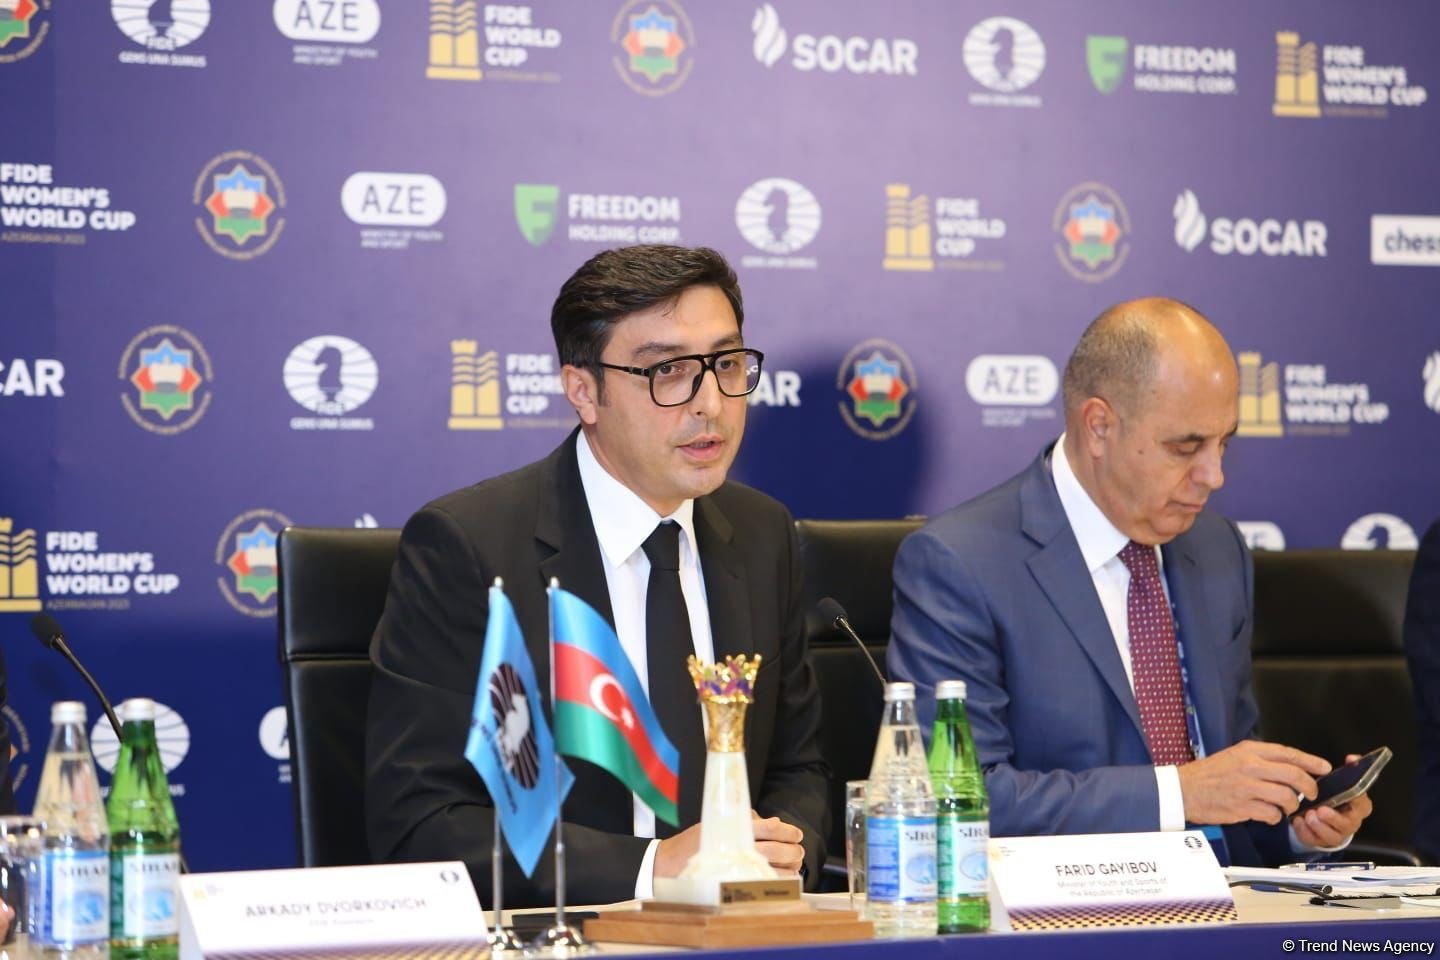 Azerbaijan to host FIDE World Cup at highest level - minister of youth and sports